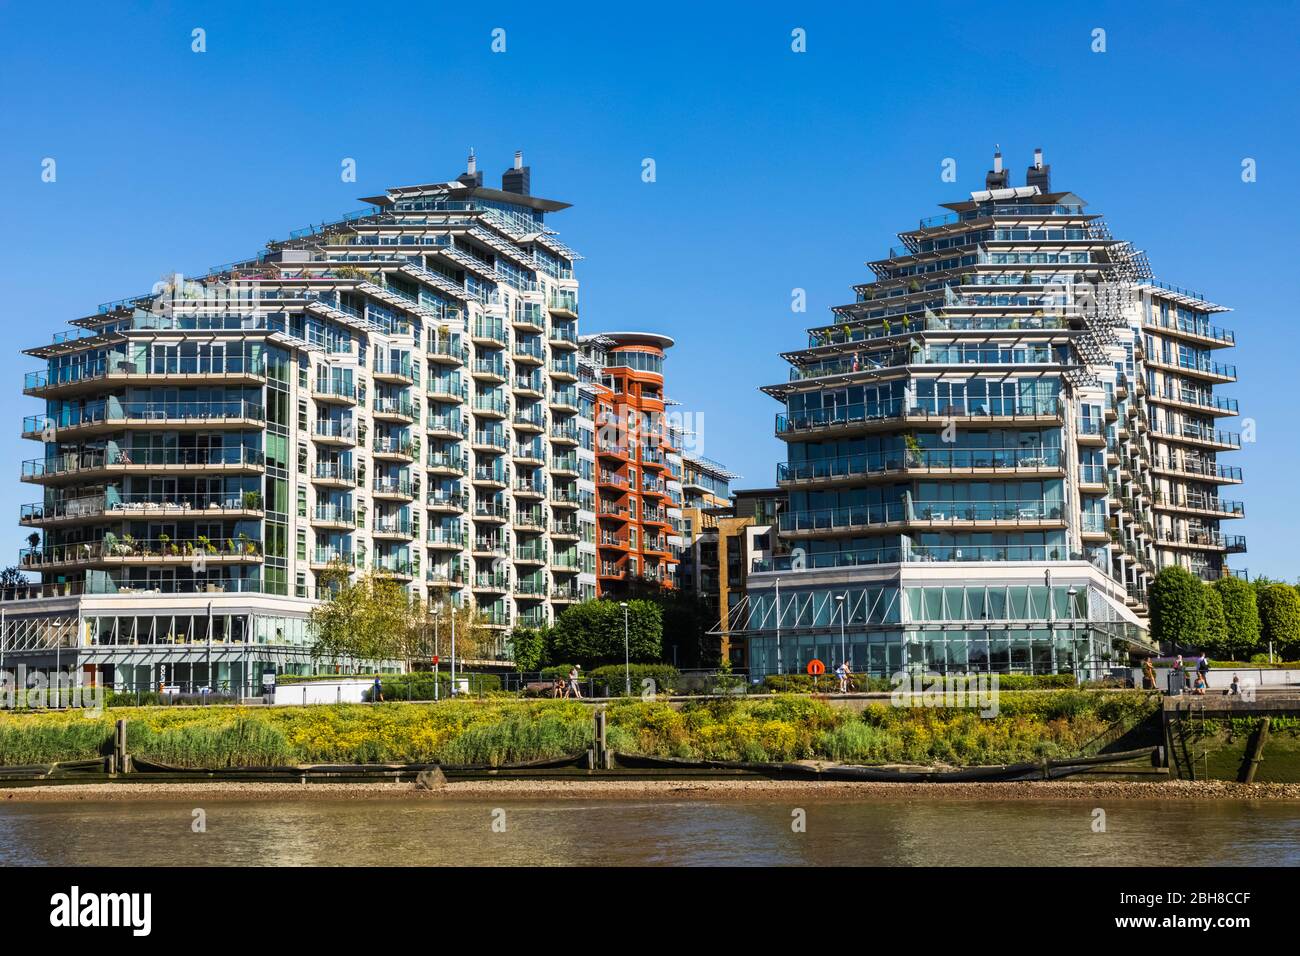 England, London, Battersea, Riverside Residential Apartment Complex Stock Photo